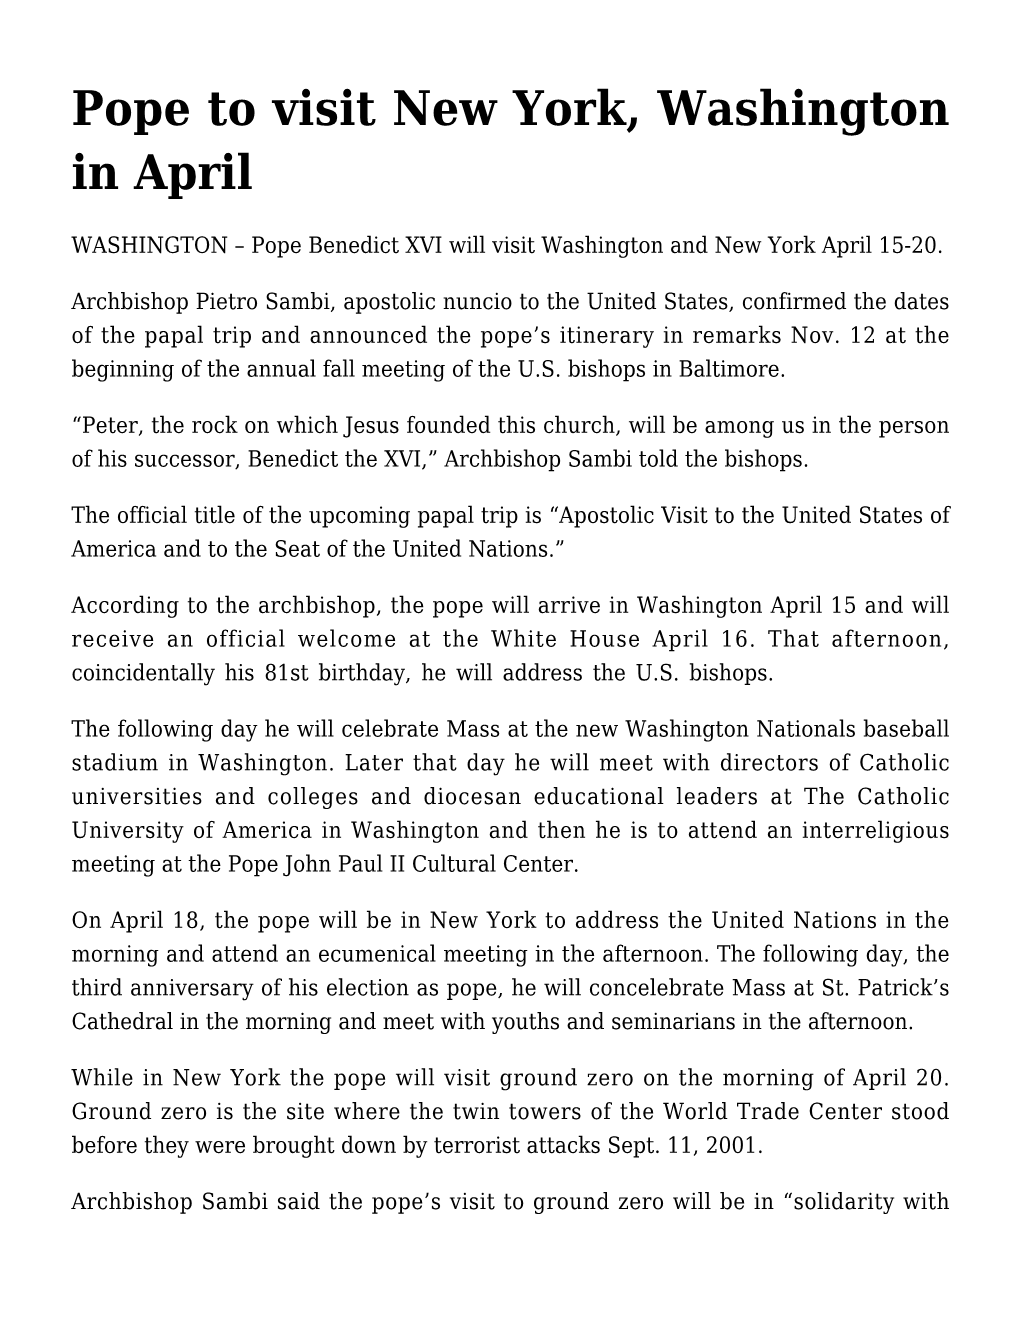 Pope to Visit New York, Washington in April